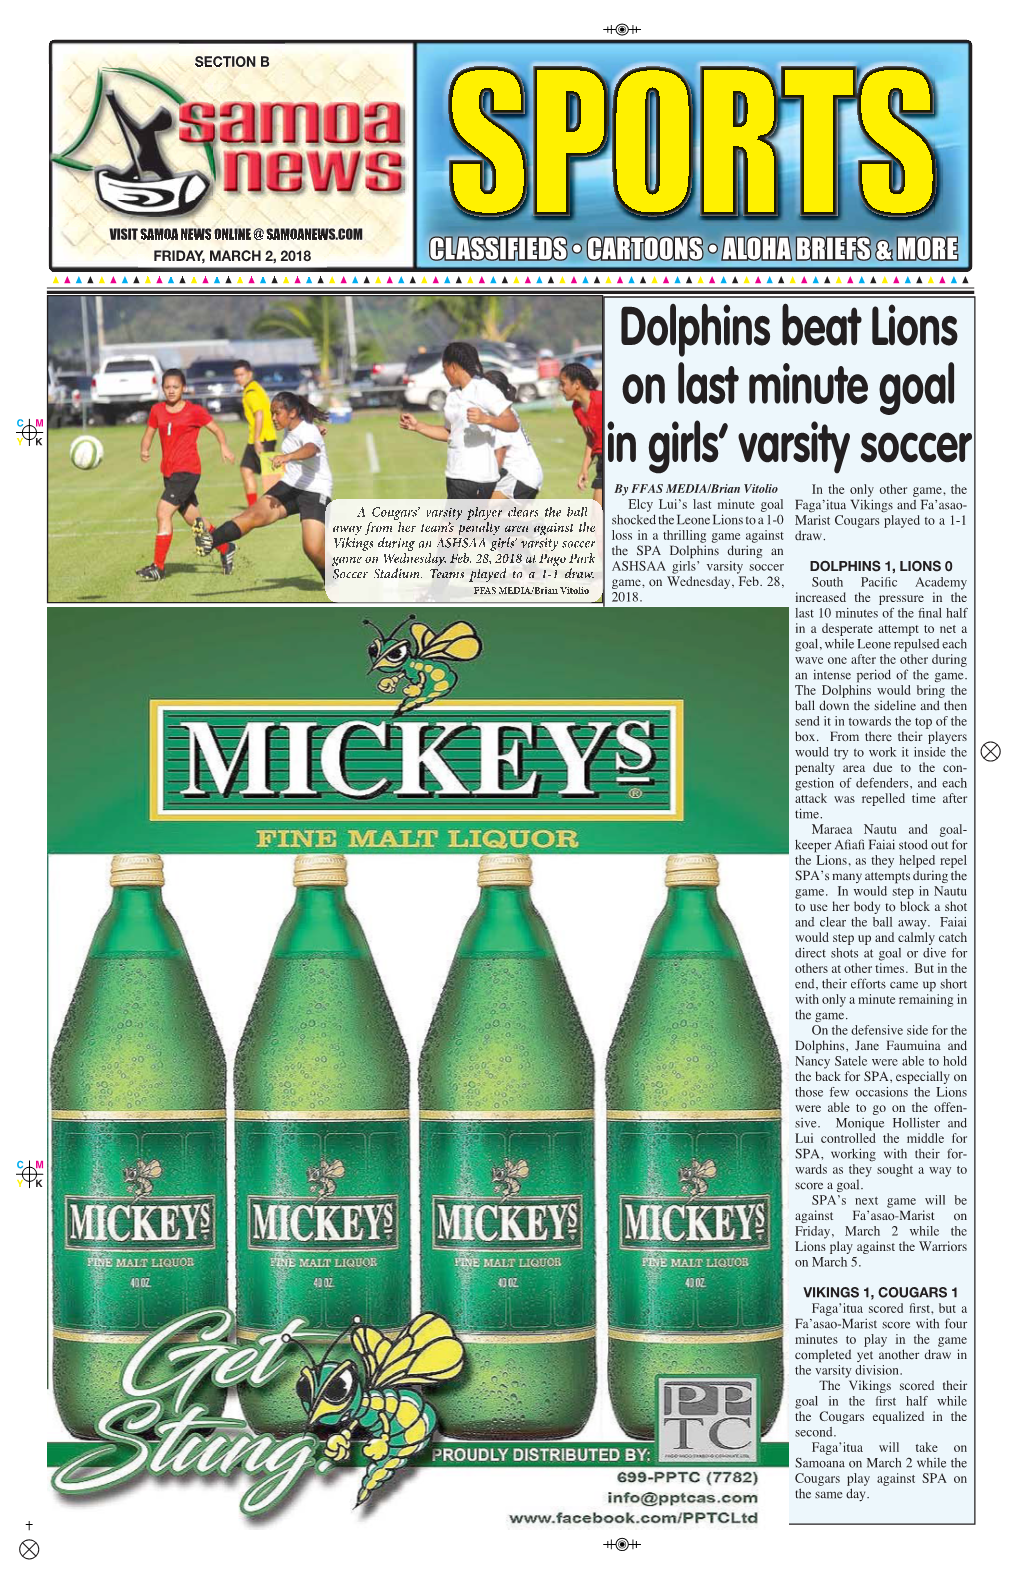 Dolphins Beat Lions on Last Minute Goal in Girls' Varsity Soccer